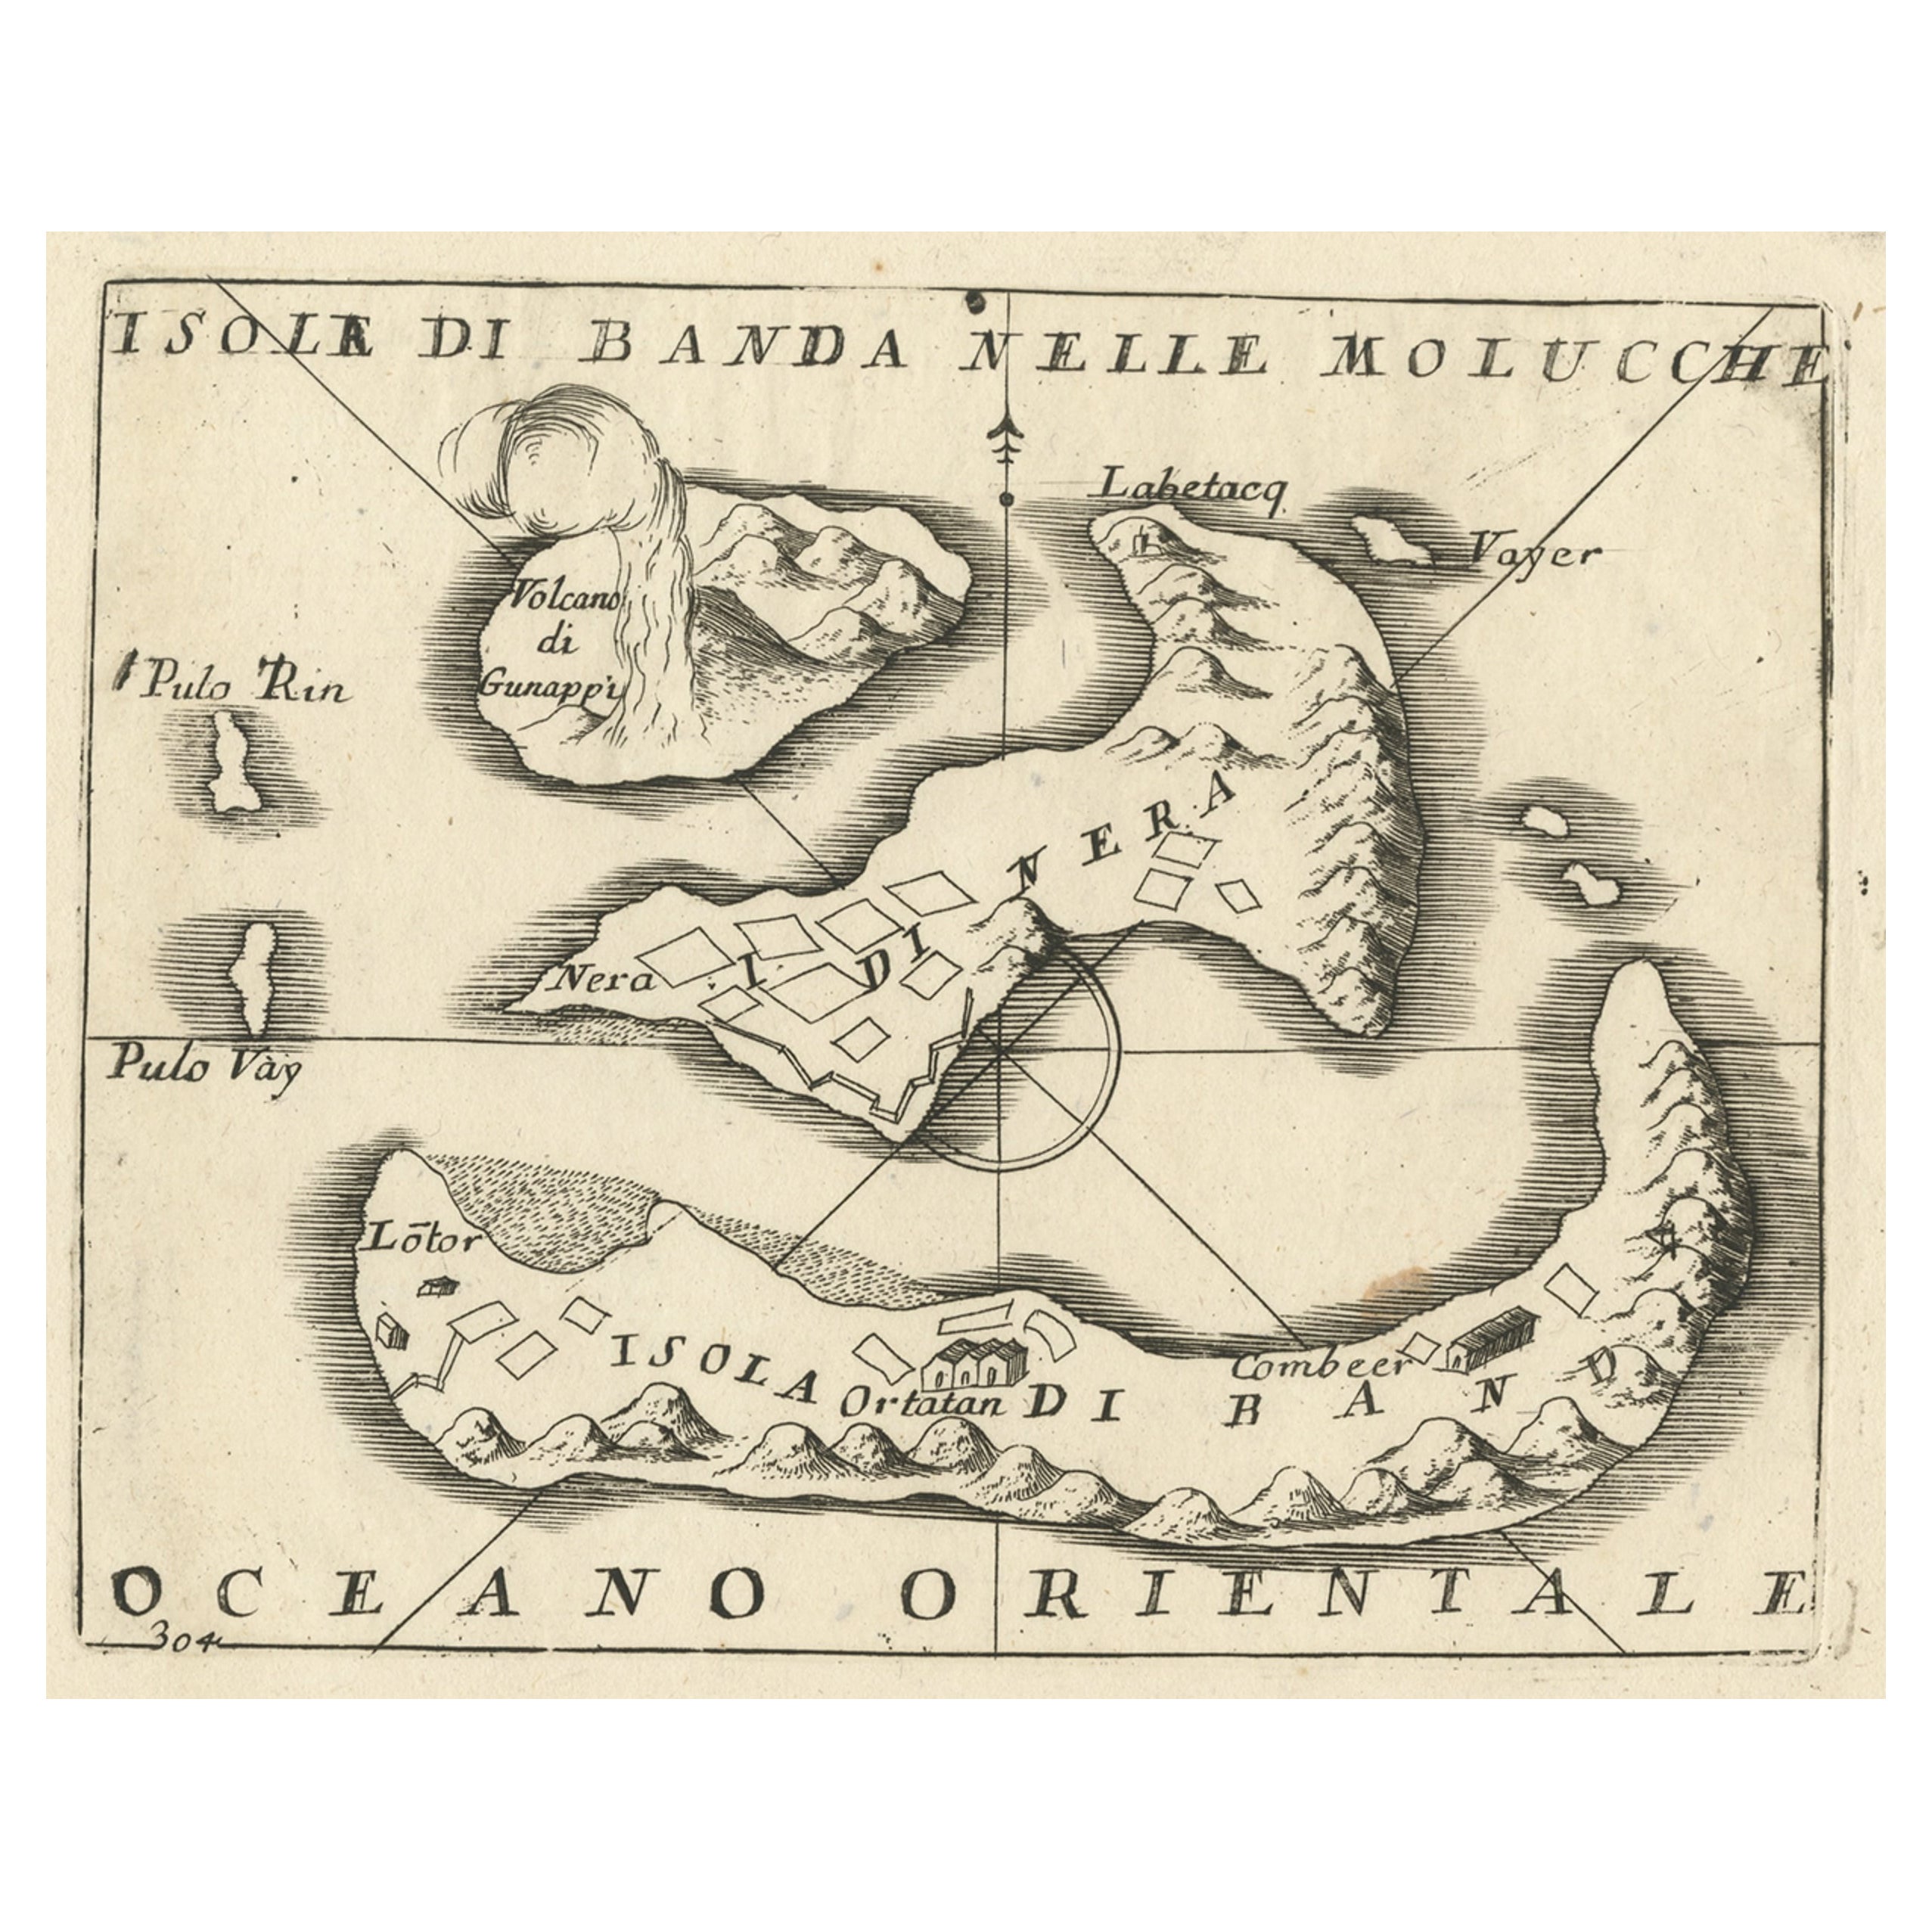 Small Old Map Depicting the Banda Islands or the Spice Islands, Indonesia, 1706